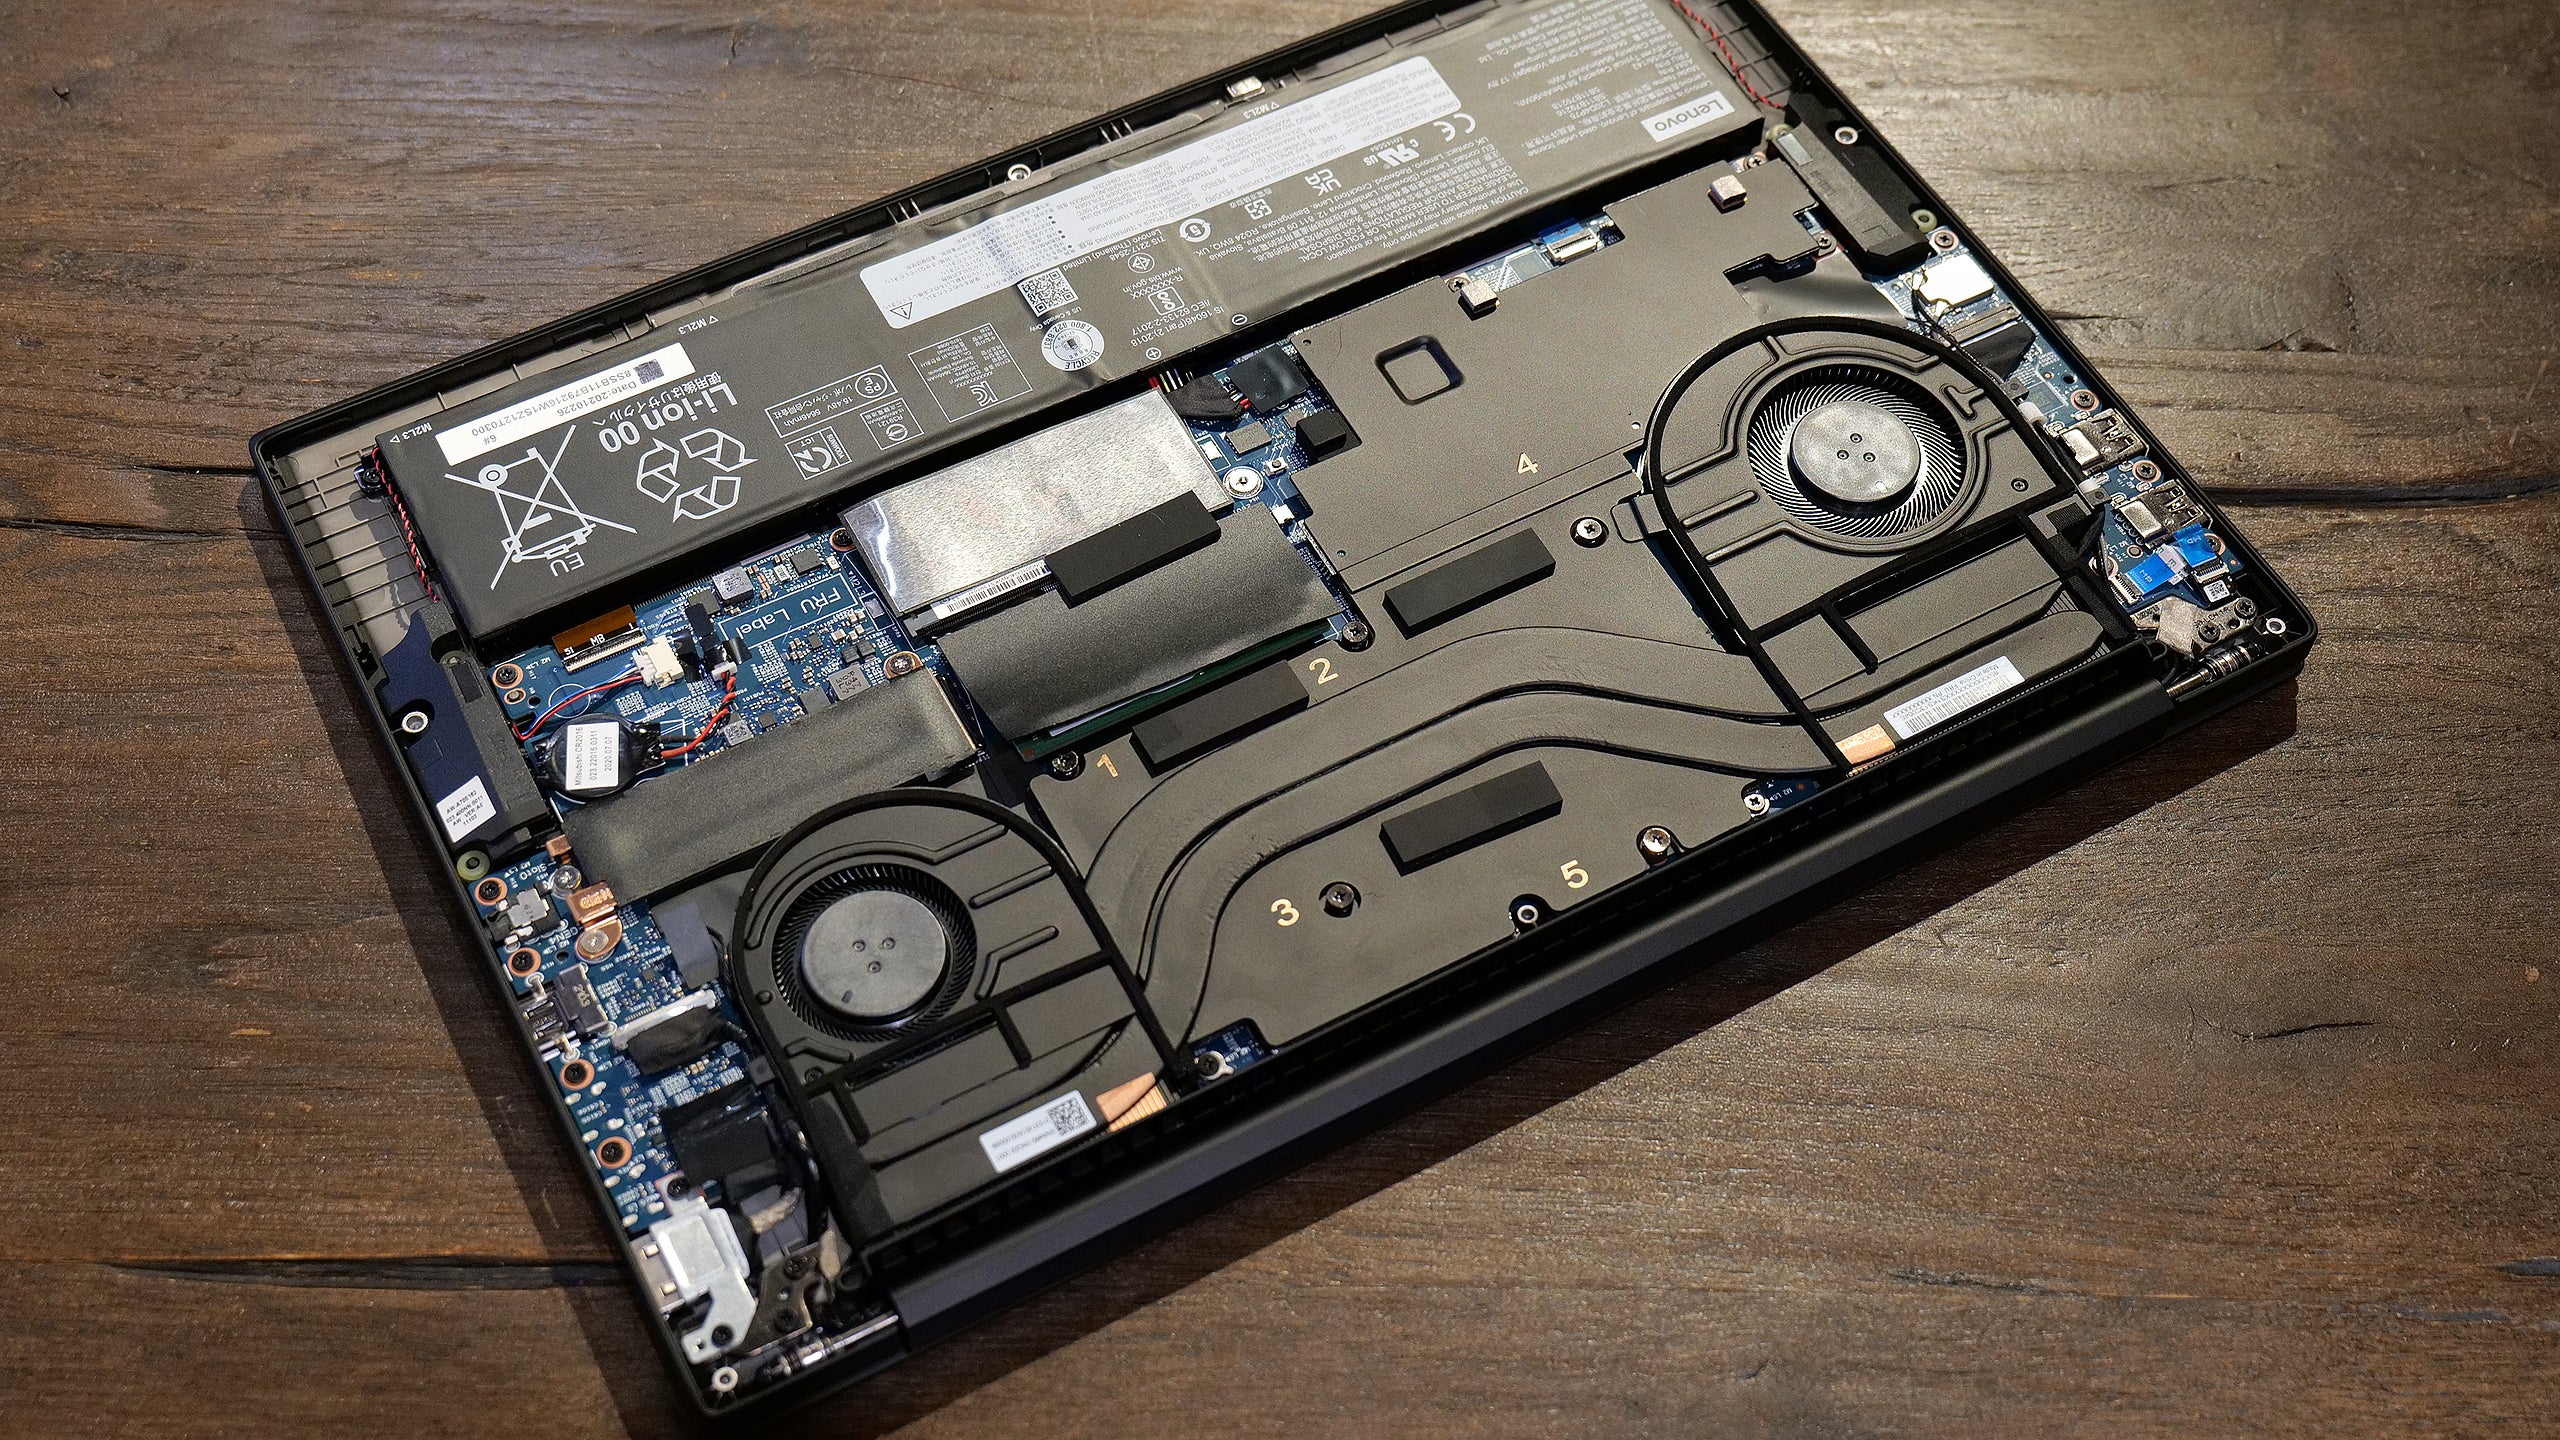 Here's what Lenovo's new cooling design on the ThinkPad X1 Extreme Gen 4 looks like. (Photo: Sam Rutherford)